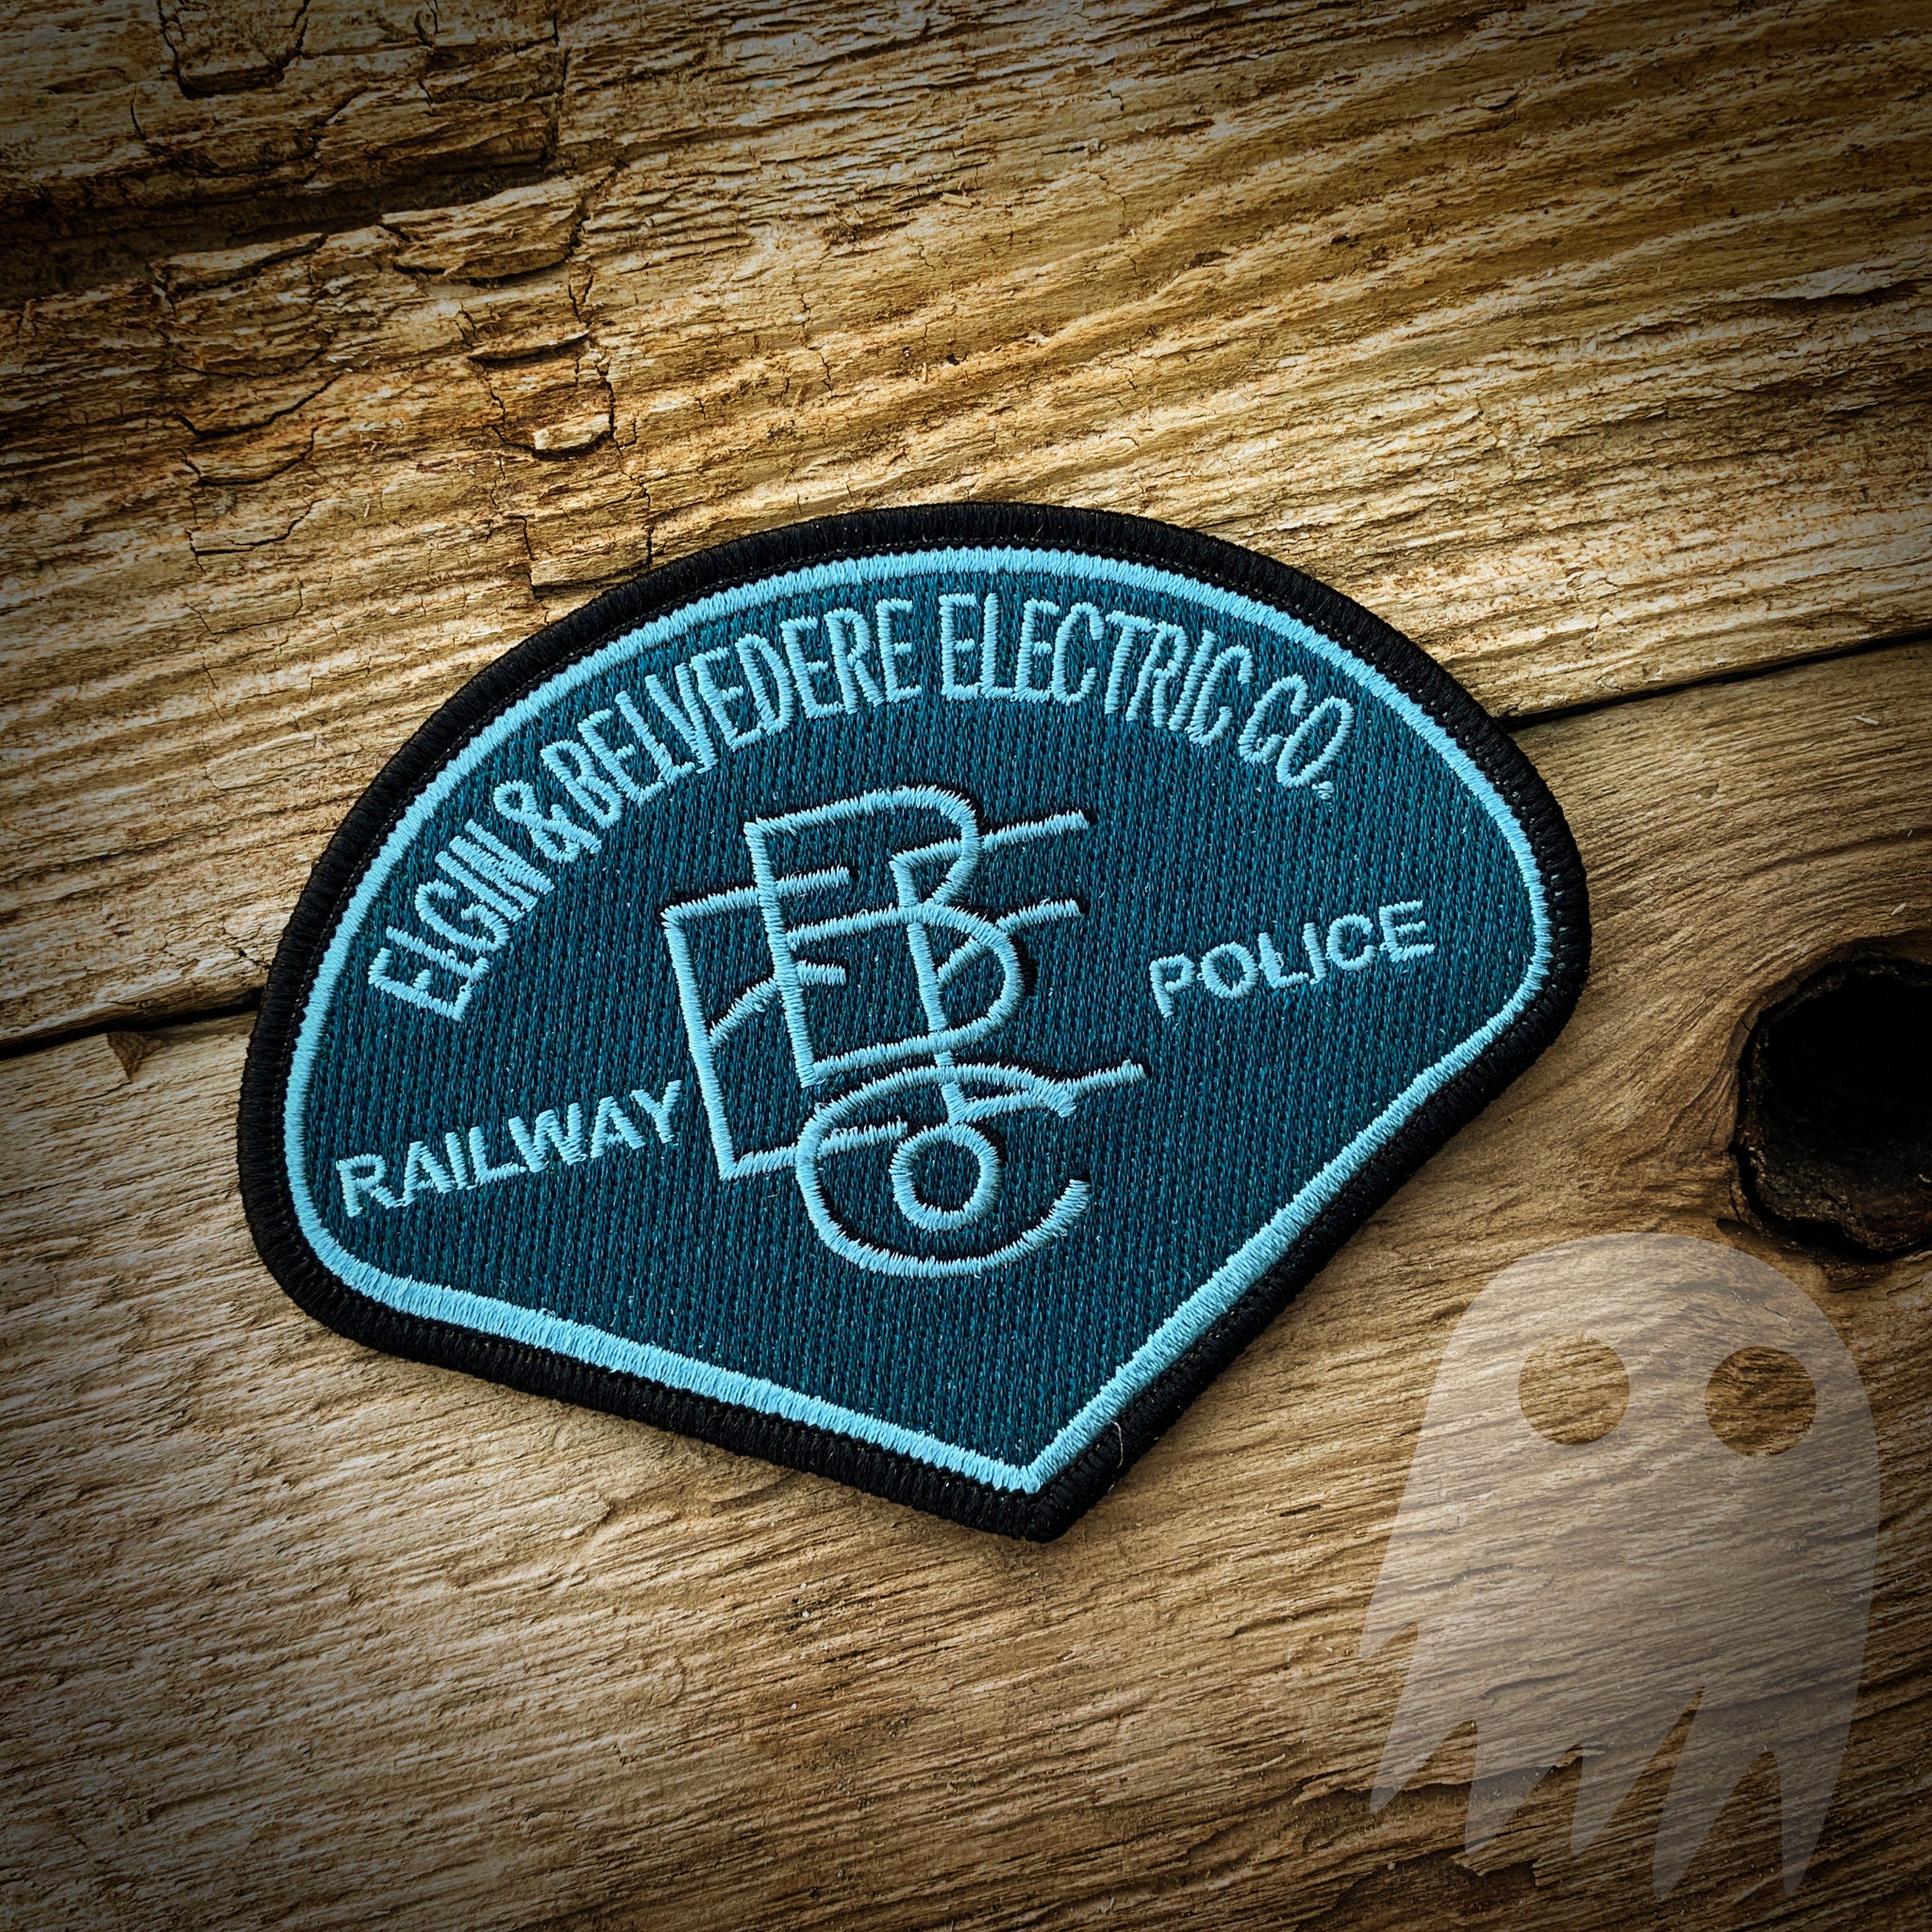 Authentic Elgin & Belvidere Electric Co. Railway Police Patch